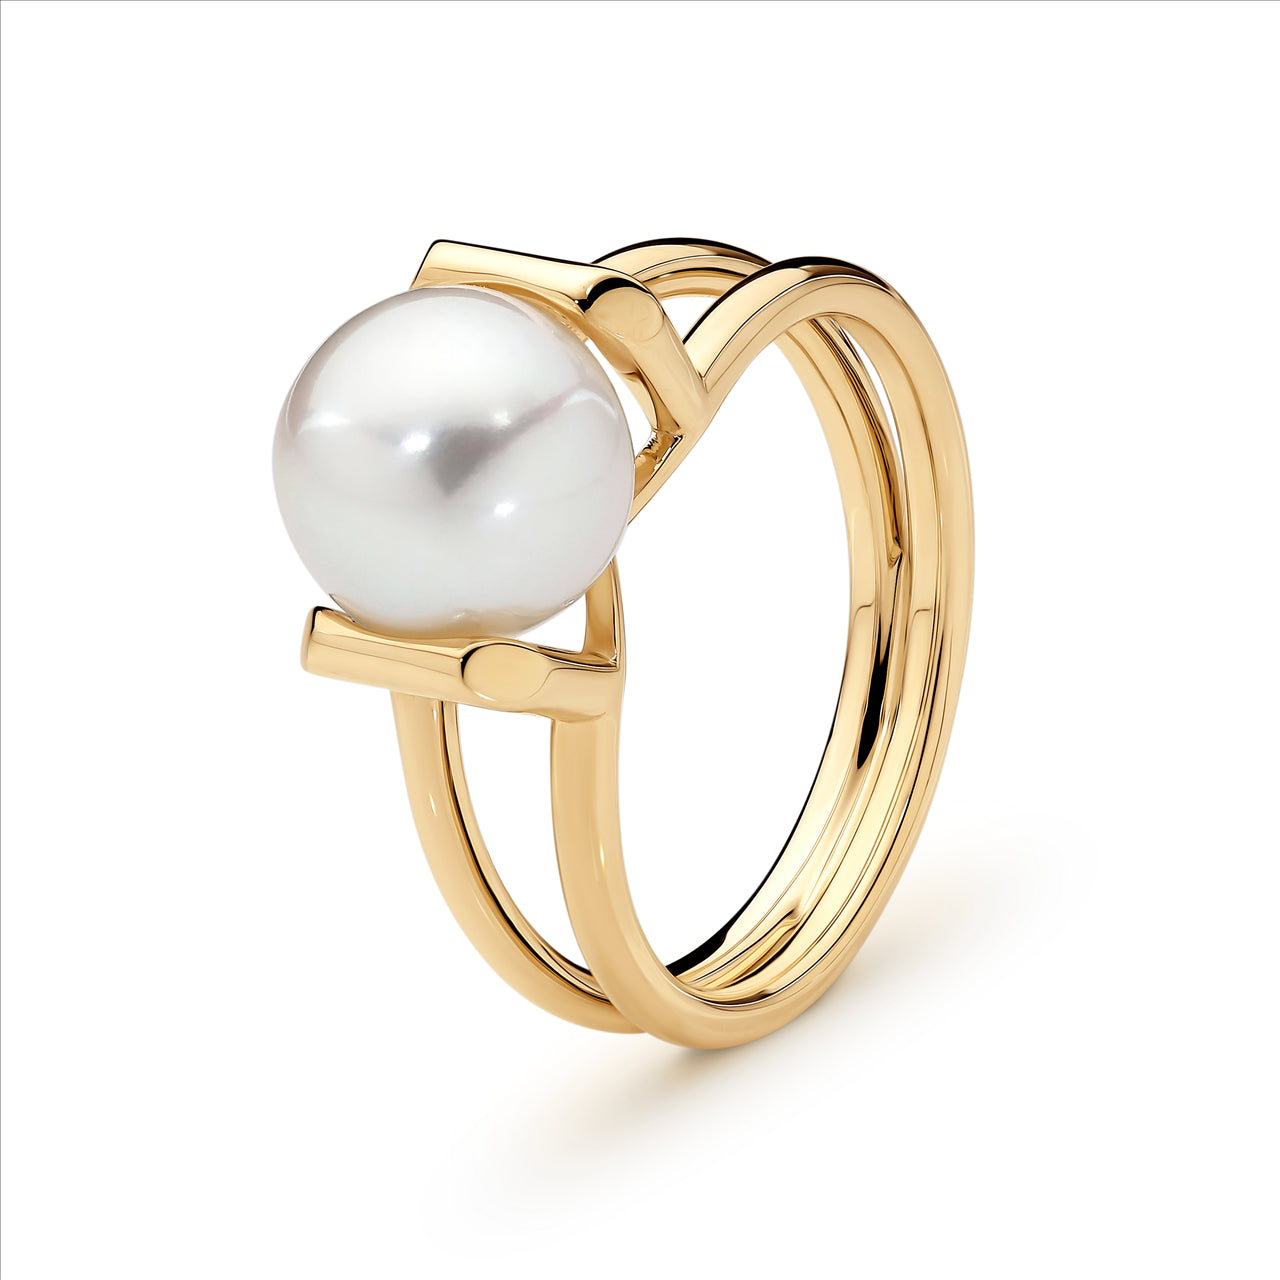 The Edison Pearl Ring